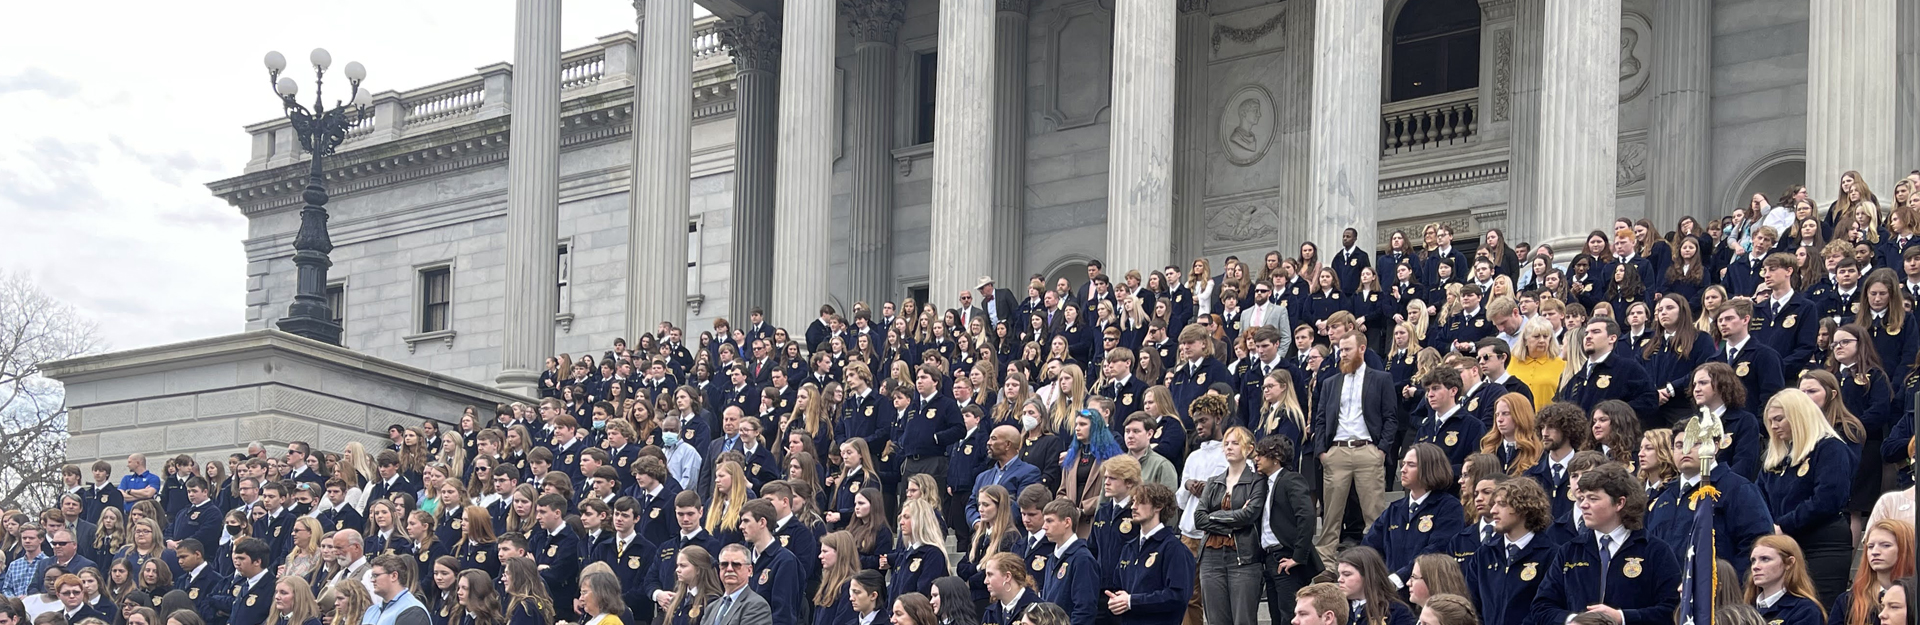 large gathering of ffa students on sc statehouse stairs